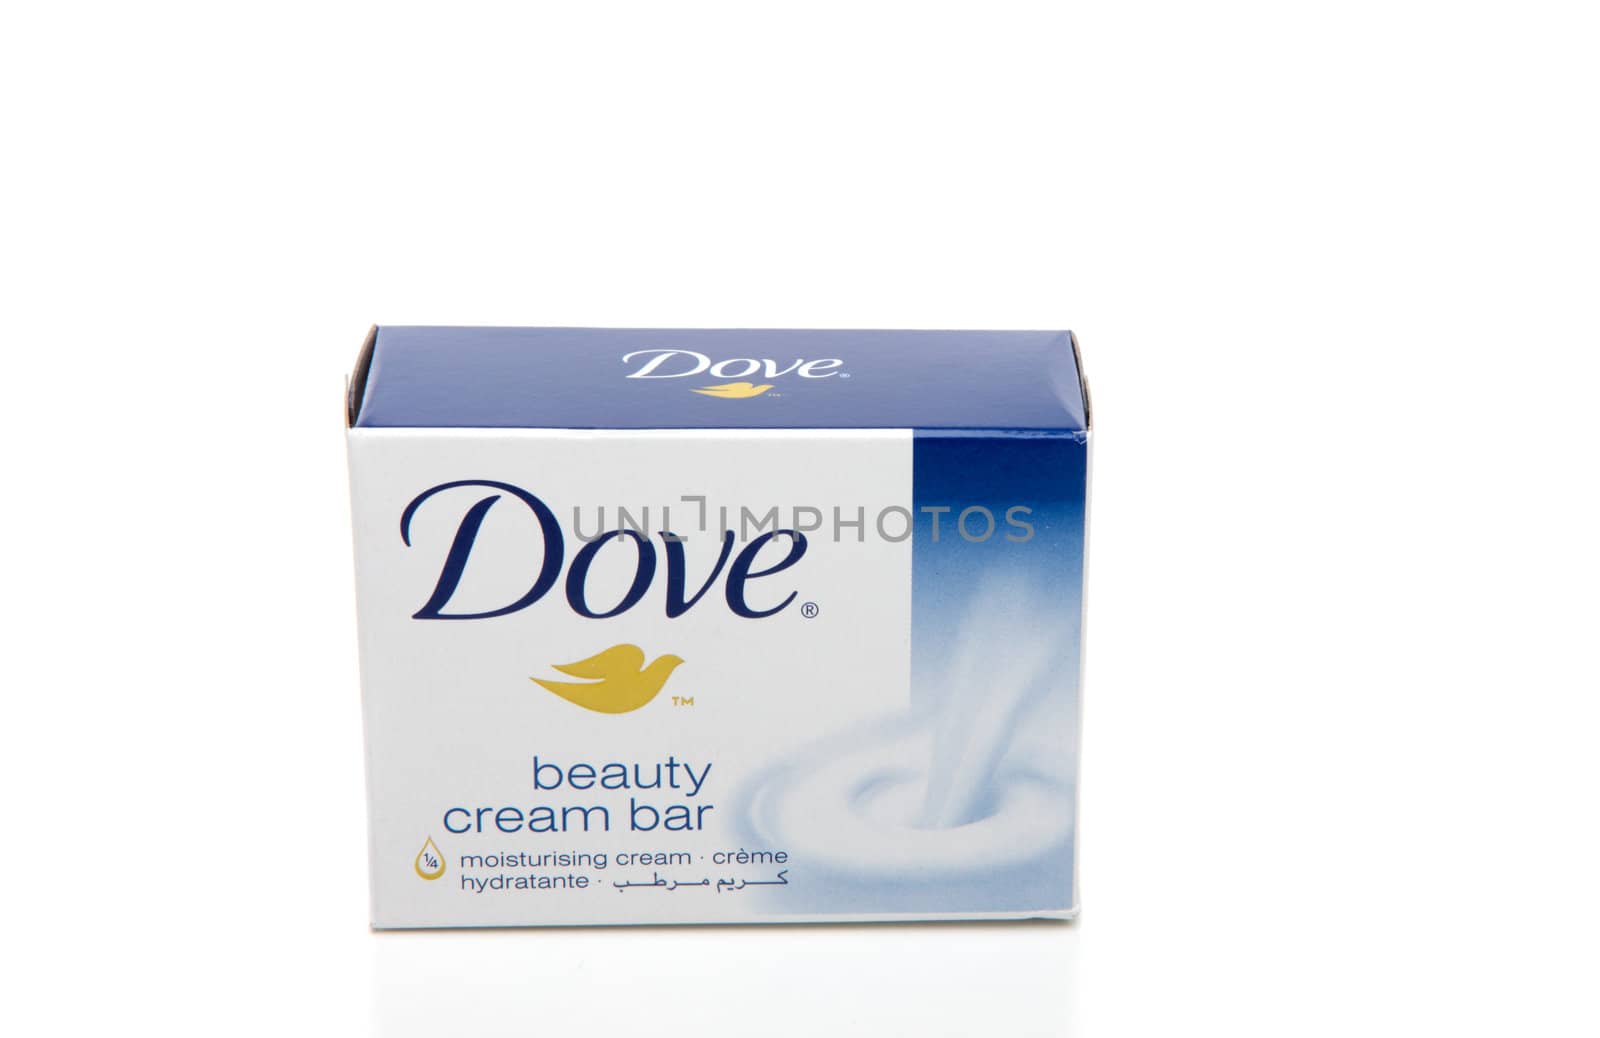 A box of Dove, beauty cream soap.  Dove soap with 1/4 moisturizing lotion improves the condition of your skin, leaving it feeling softer and smoother than with ordinary soap.  Dove is made by Unilever.  White background.  Editorial use only.

